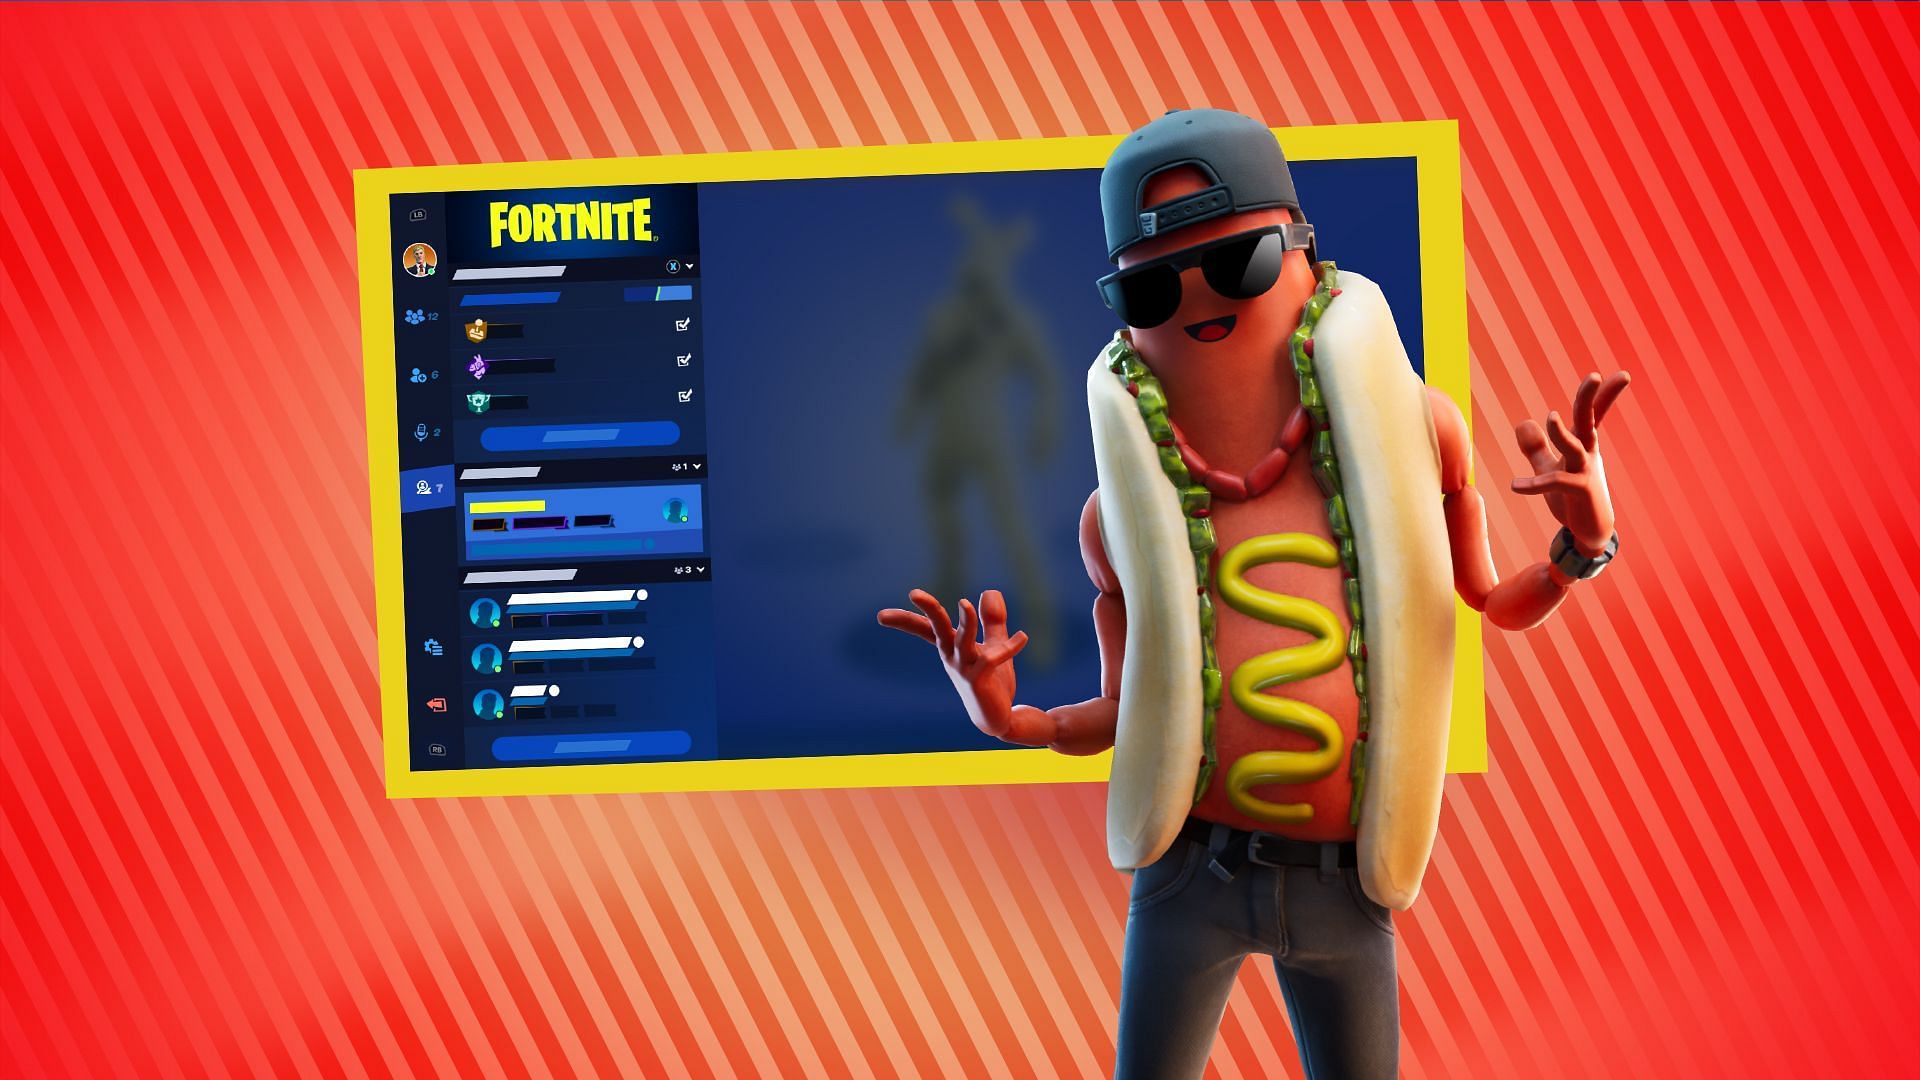 Fortnite social tags have reinvented how players will interact in-game (Image via Epic Games/Fortnite)